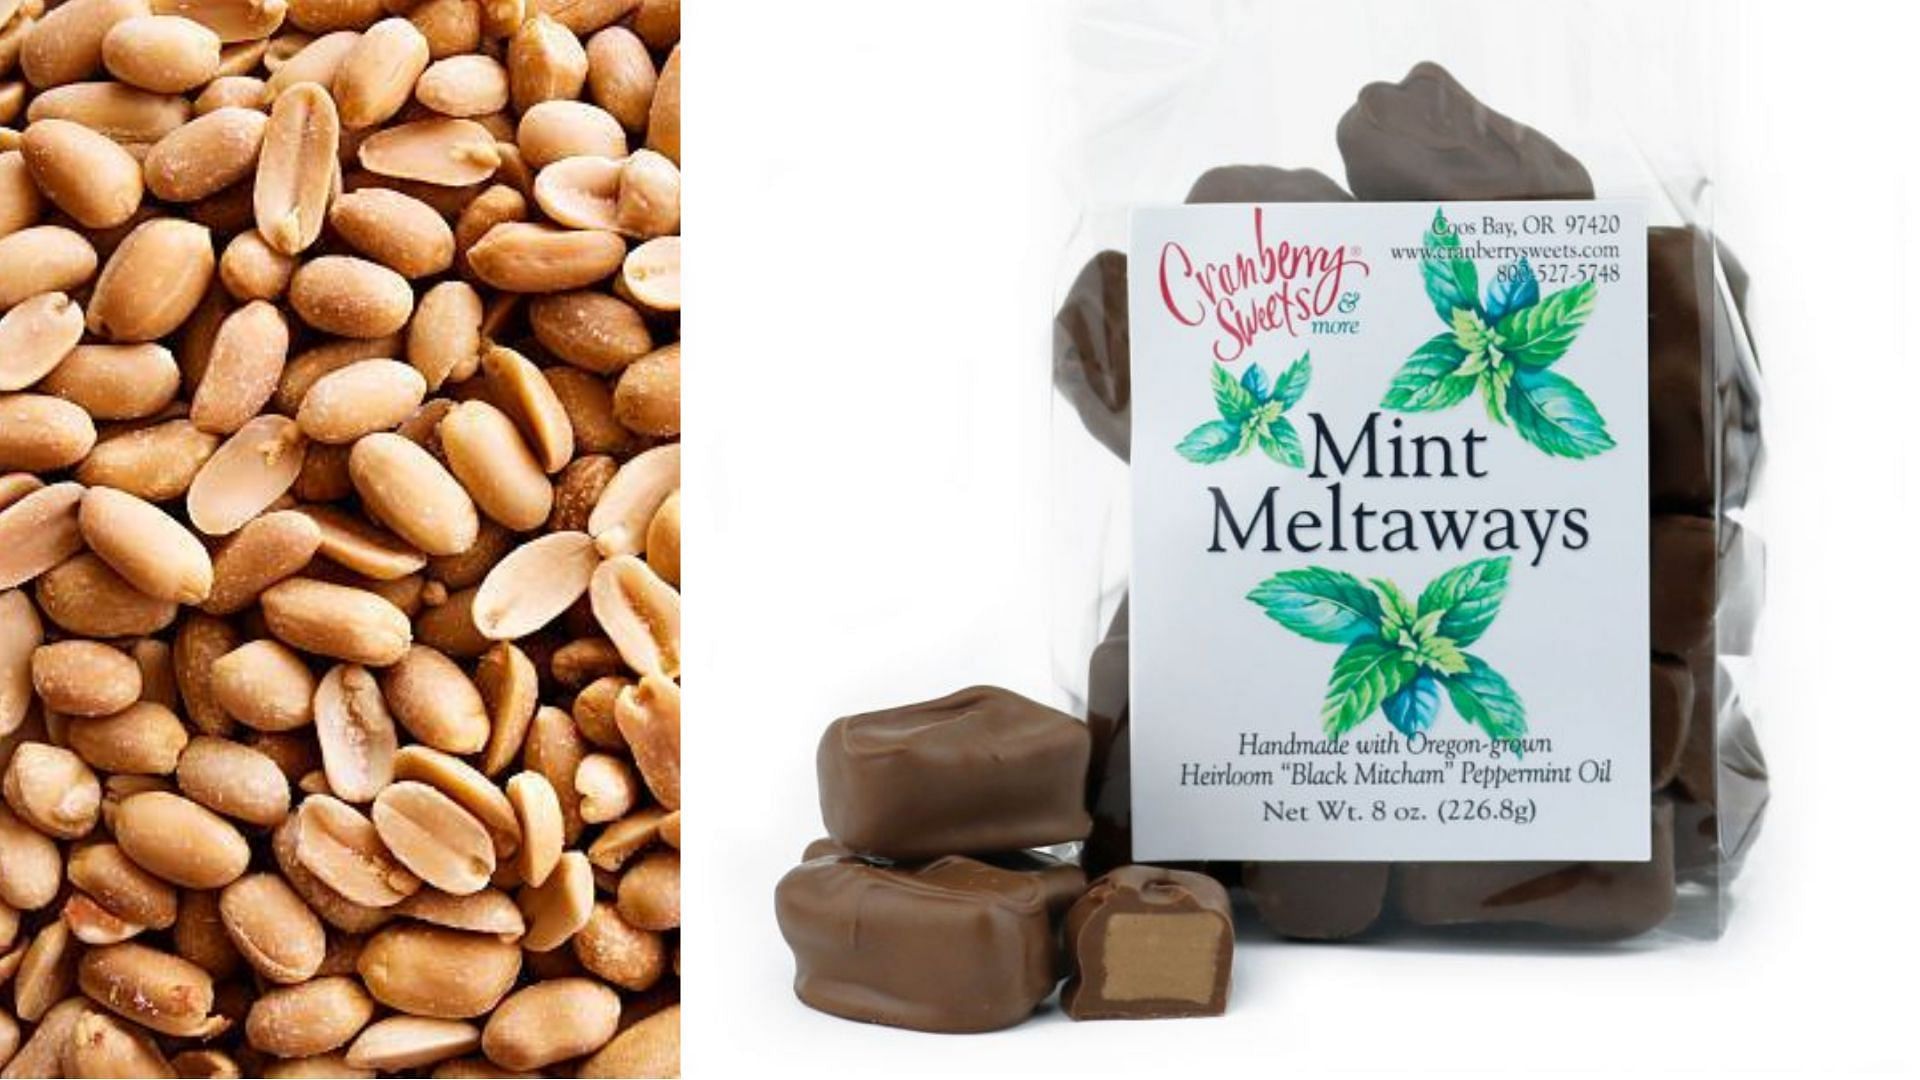 Cranberry Sweets recalls Mint Meltaways over mistaken package-labeling (Image via Getty/Cranberry Sweets))